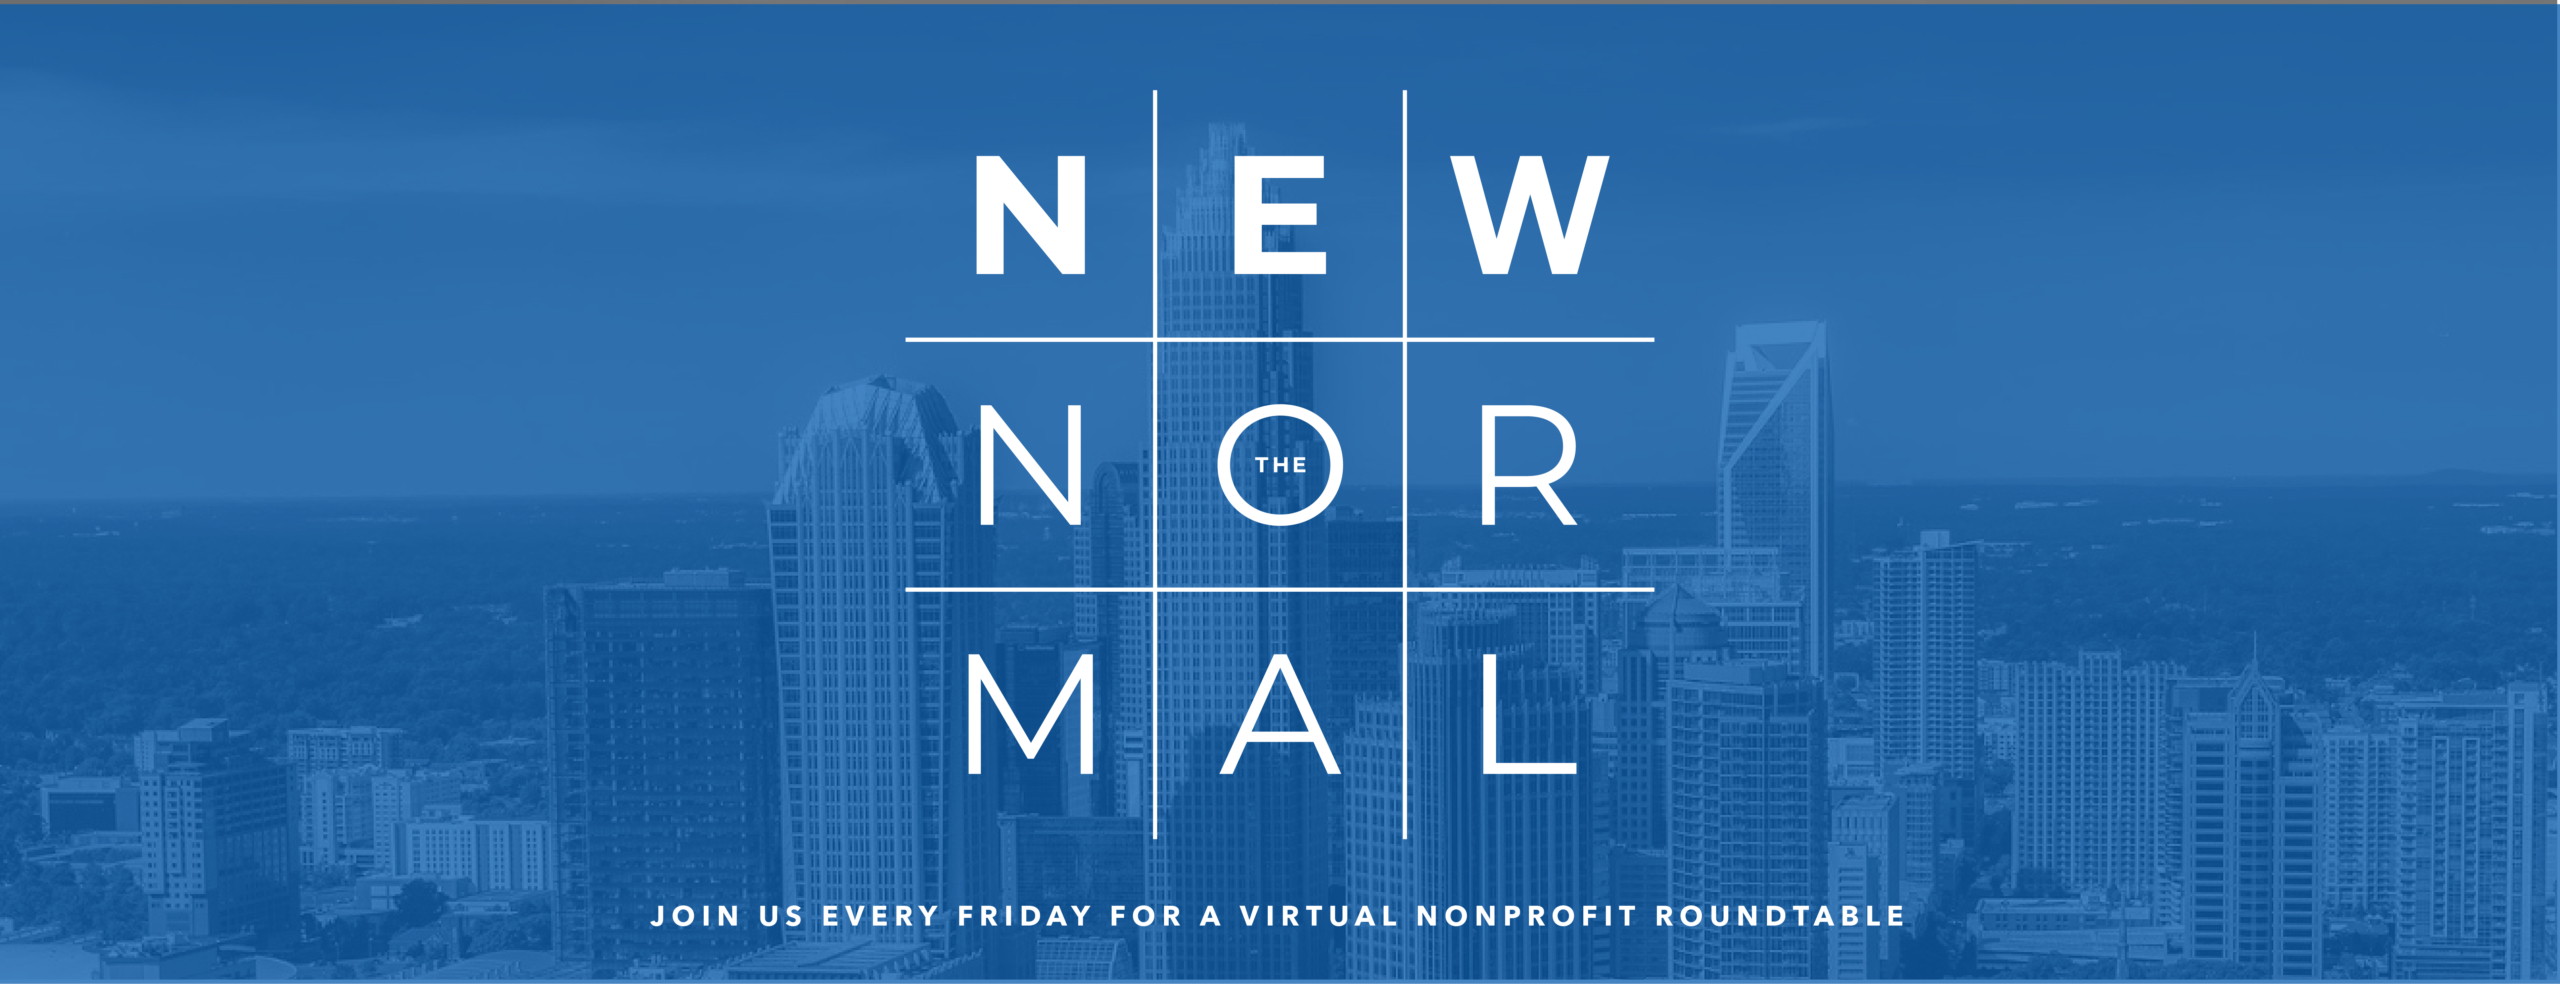 Staying Engaged While Staying at Home: Takeaways from #NewNormalCLT